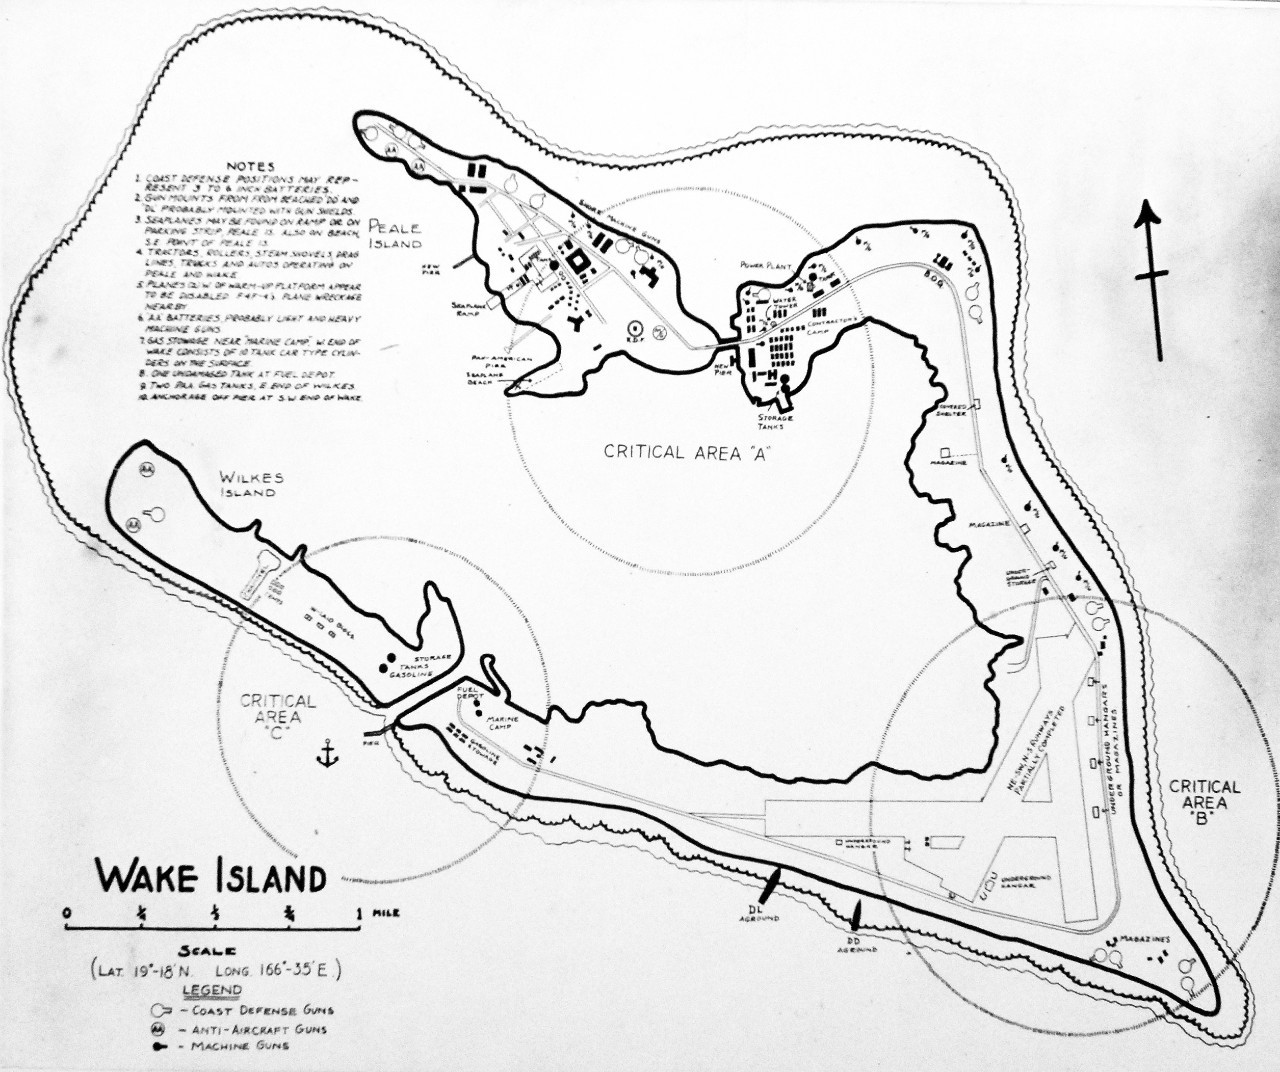 80-G-466235:   Wake Island, February 1942.   Diagram.        Official U.S. Navy Photograph, now in the collections of the National Archives.  (2018/03/14).  